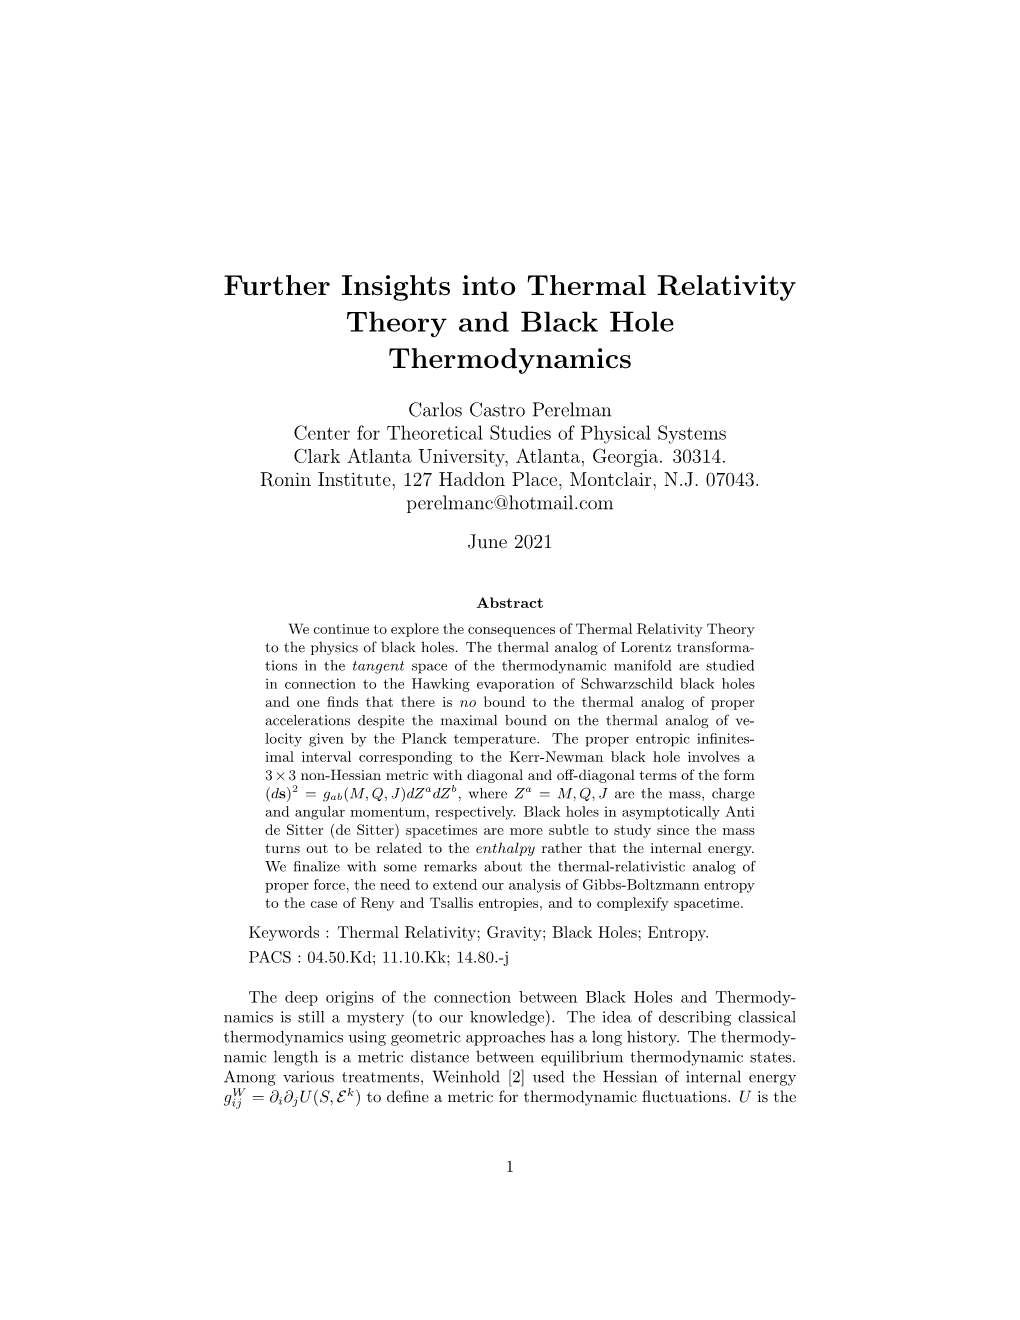 Further Insights Into Thermal Relativity Theory and Black Hole Thermodynamics